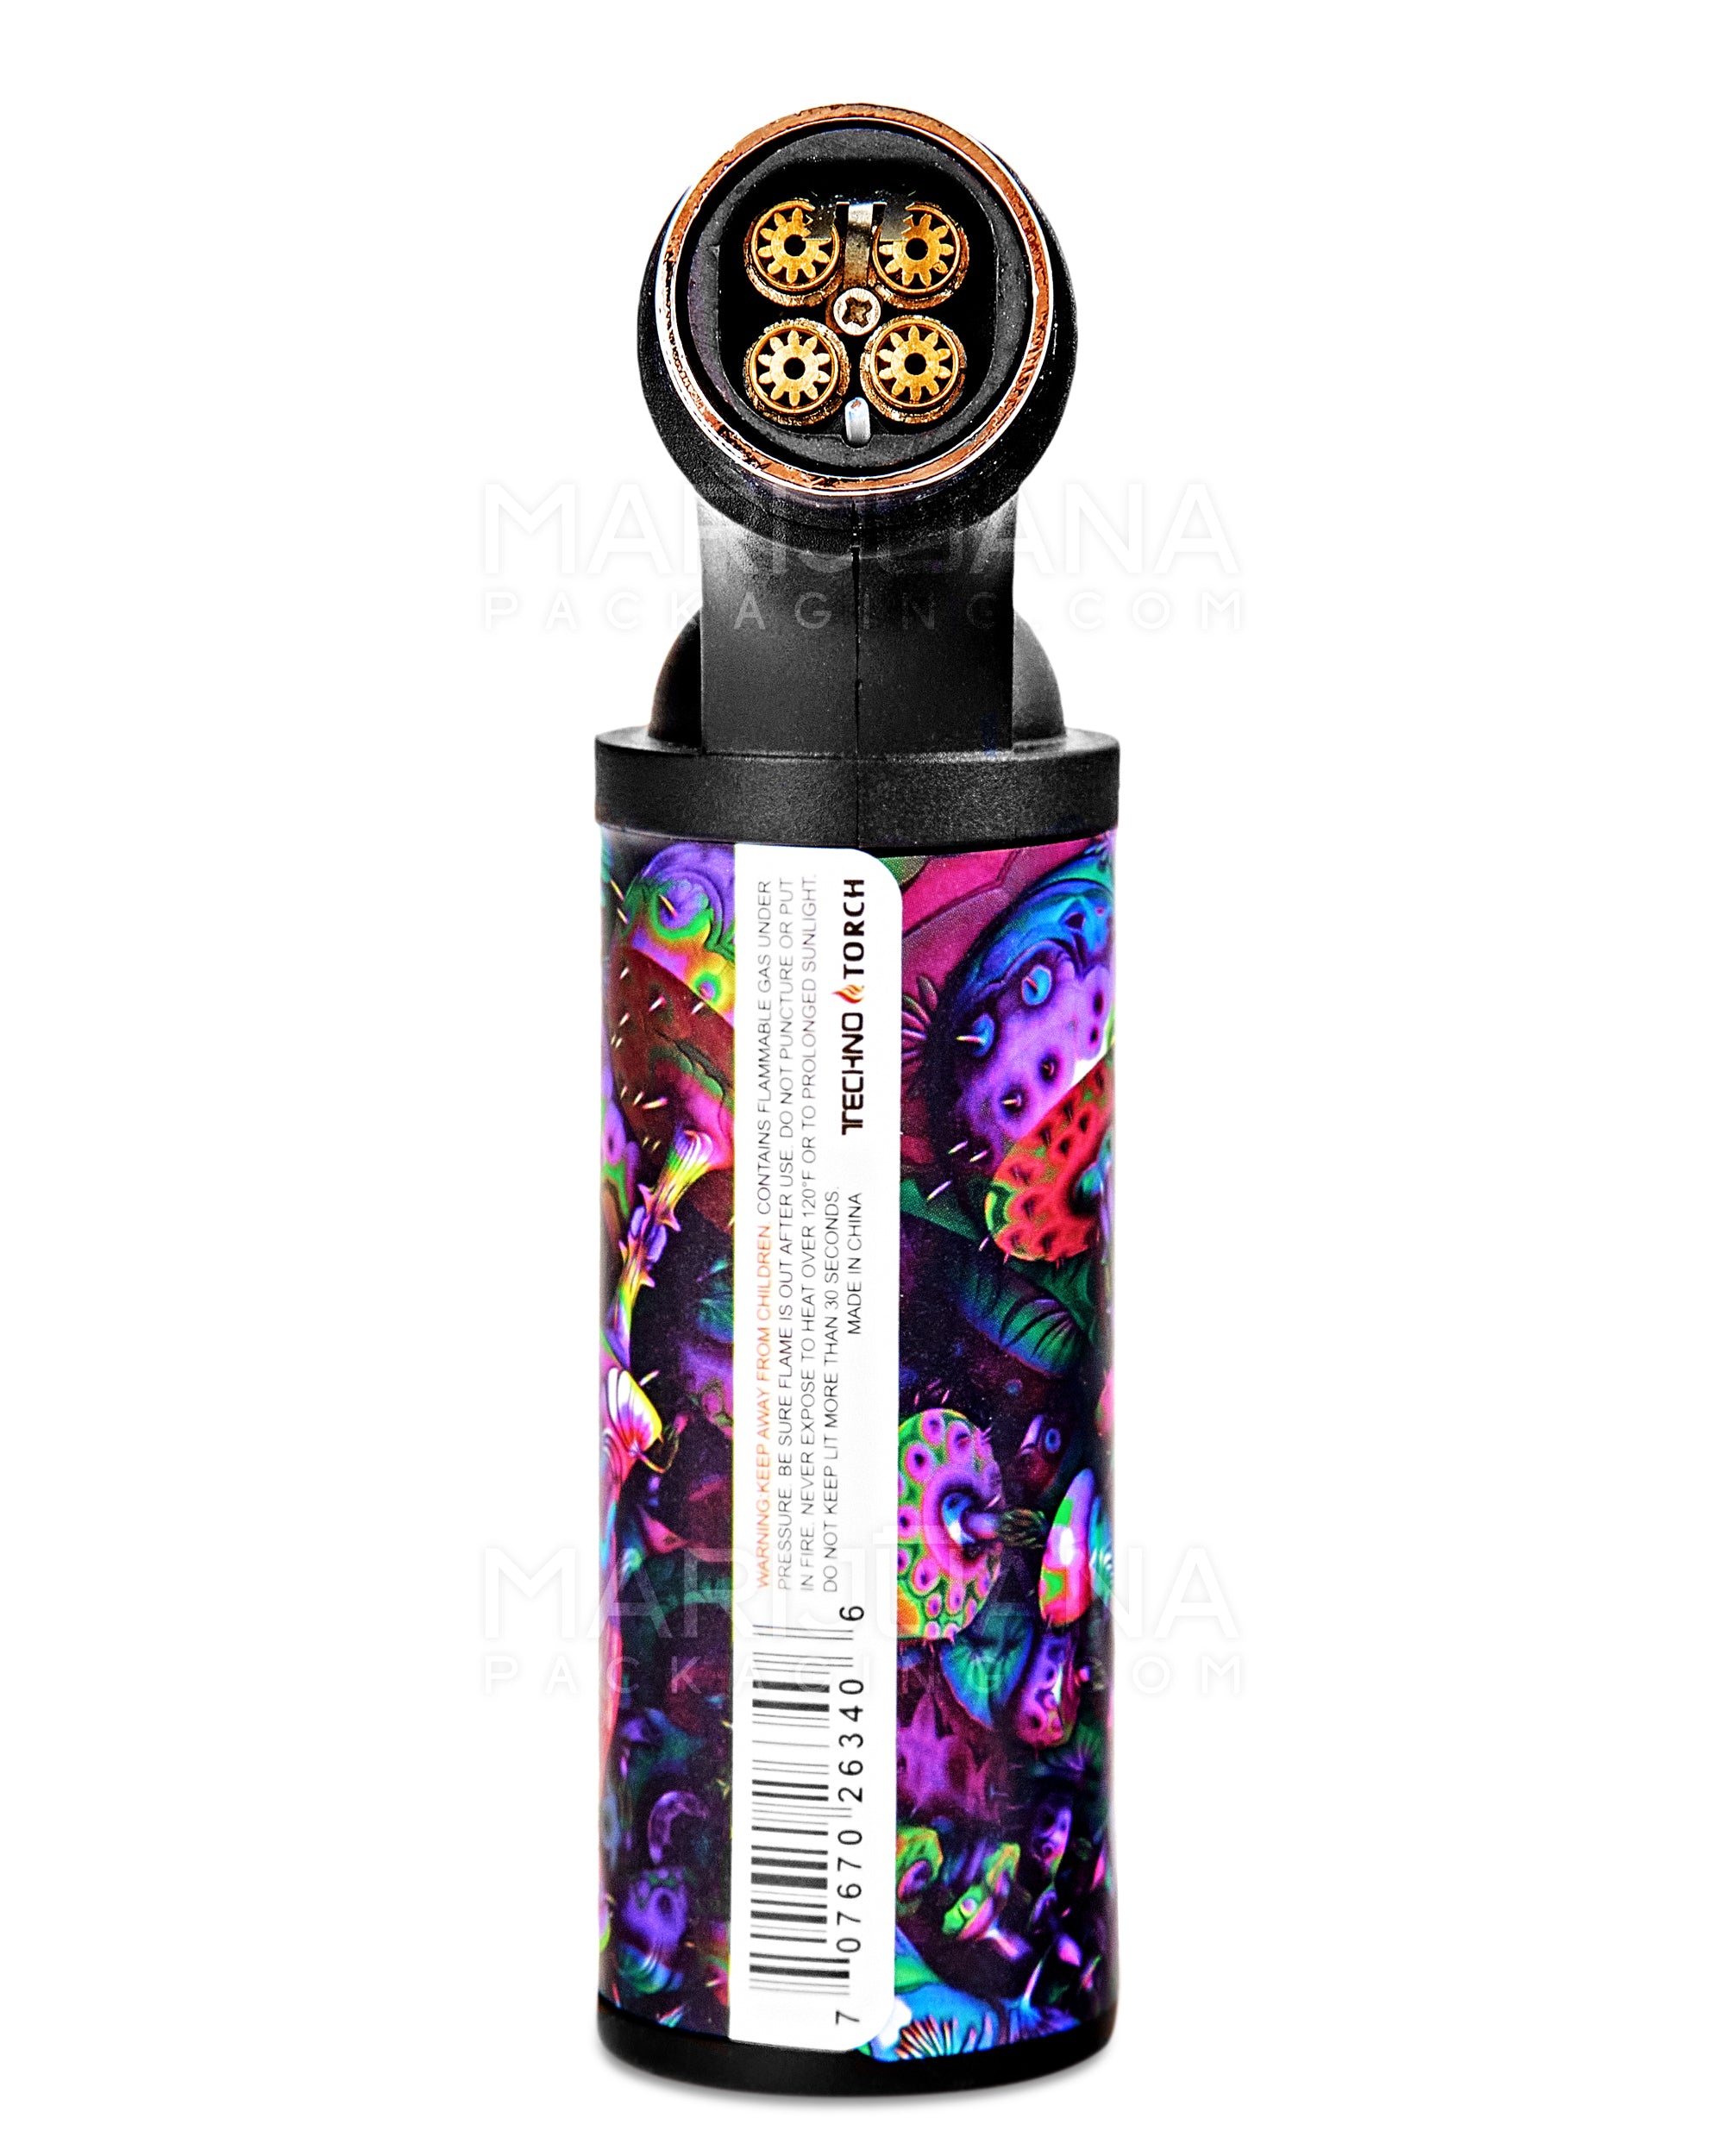 Psychedelic Design Plastic Torch w/ Safety Lock | 4.5in Tall - Butane - Assorted - 3